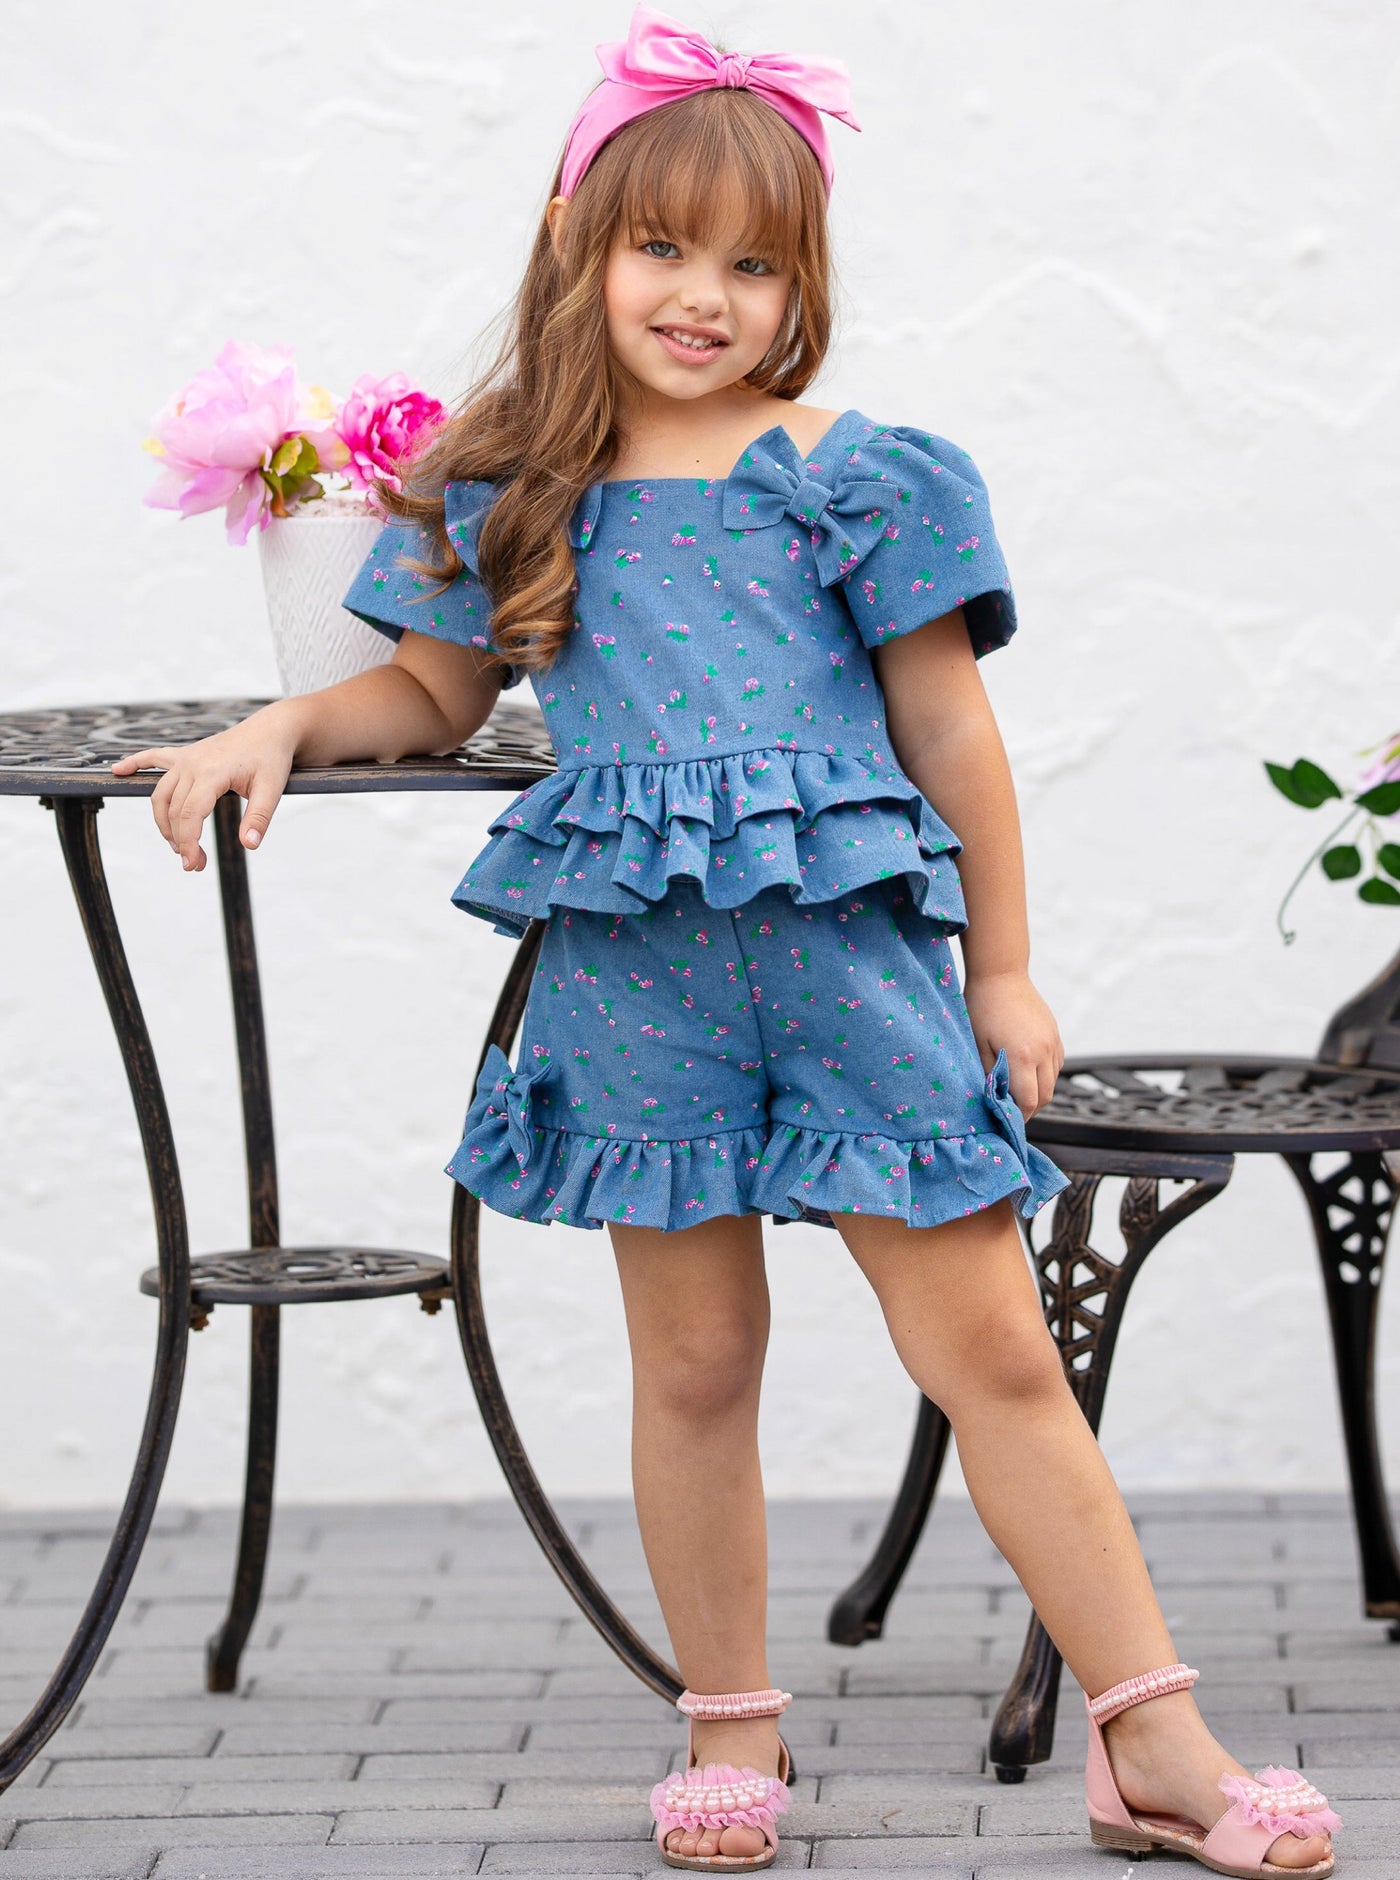 Mia Belle Girls Floral Top And Short Set | Girls Casual